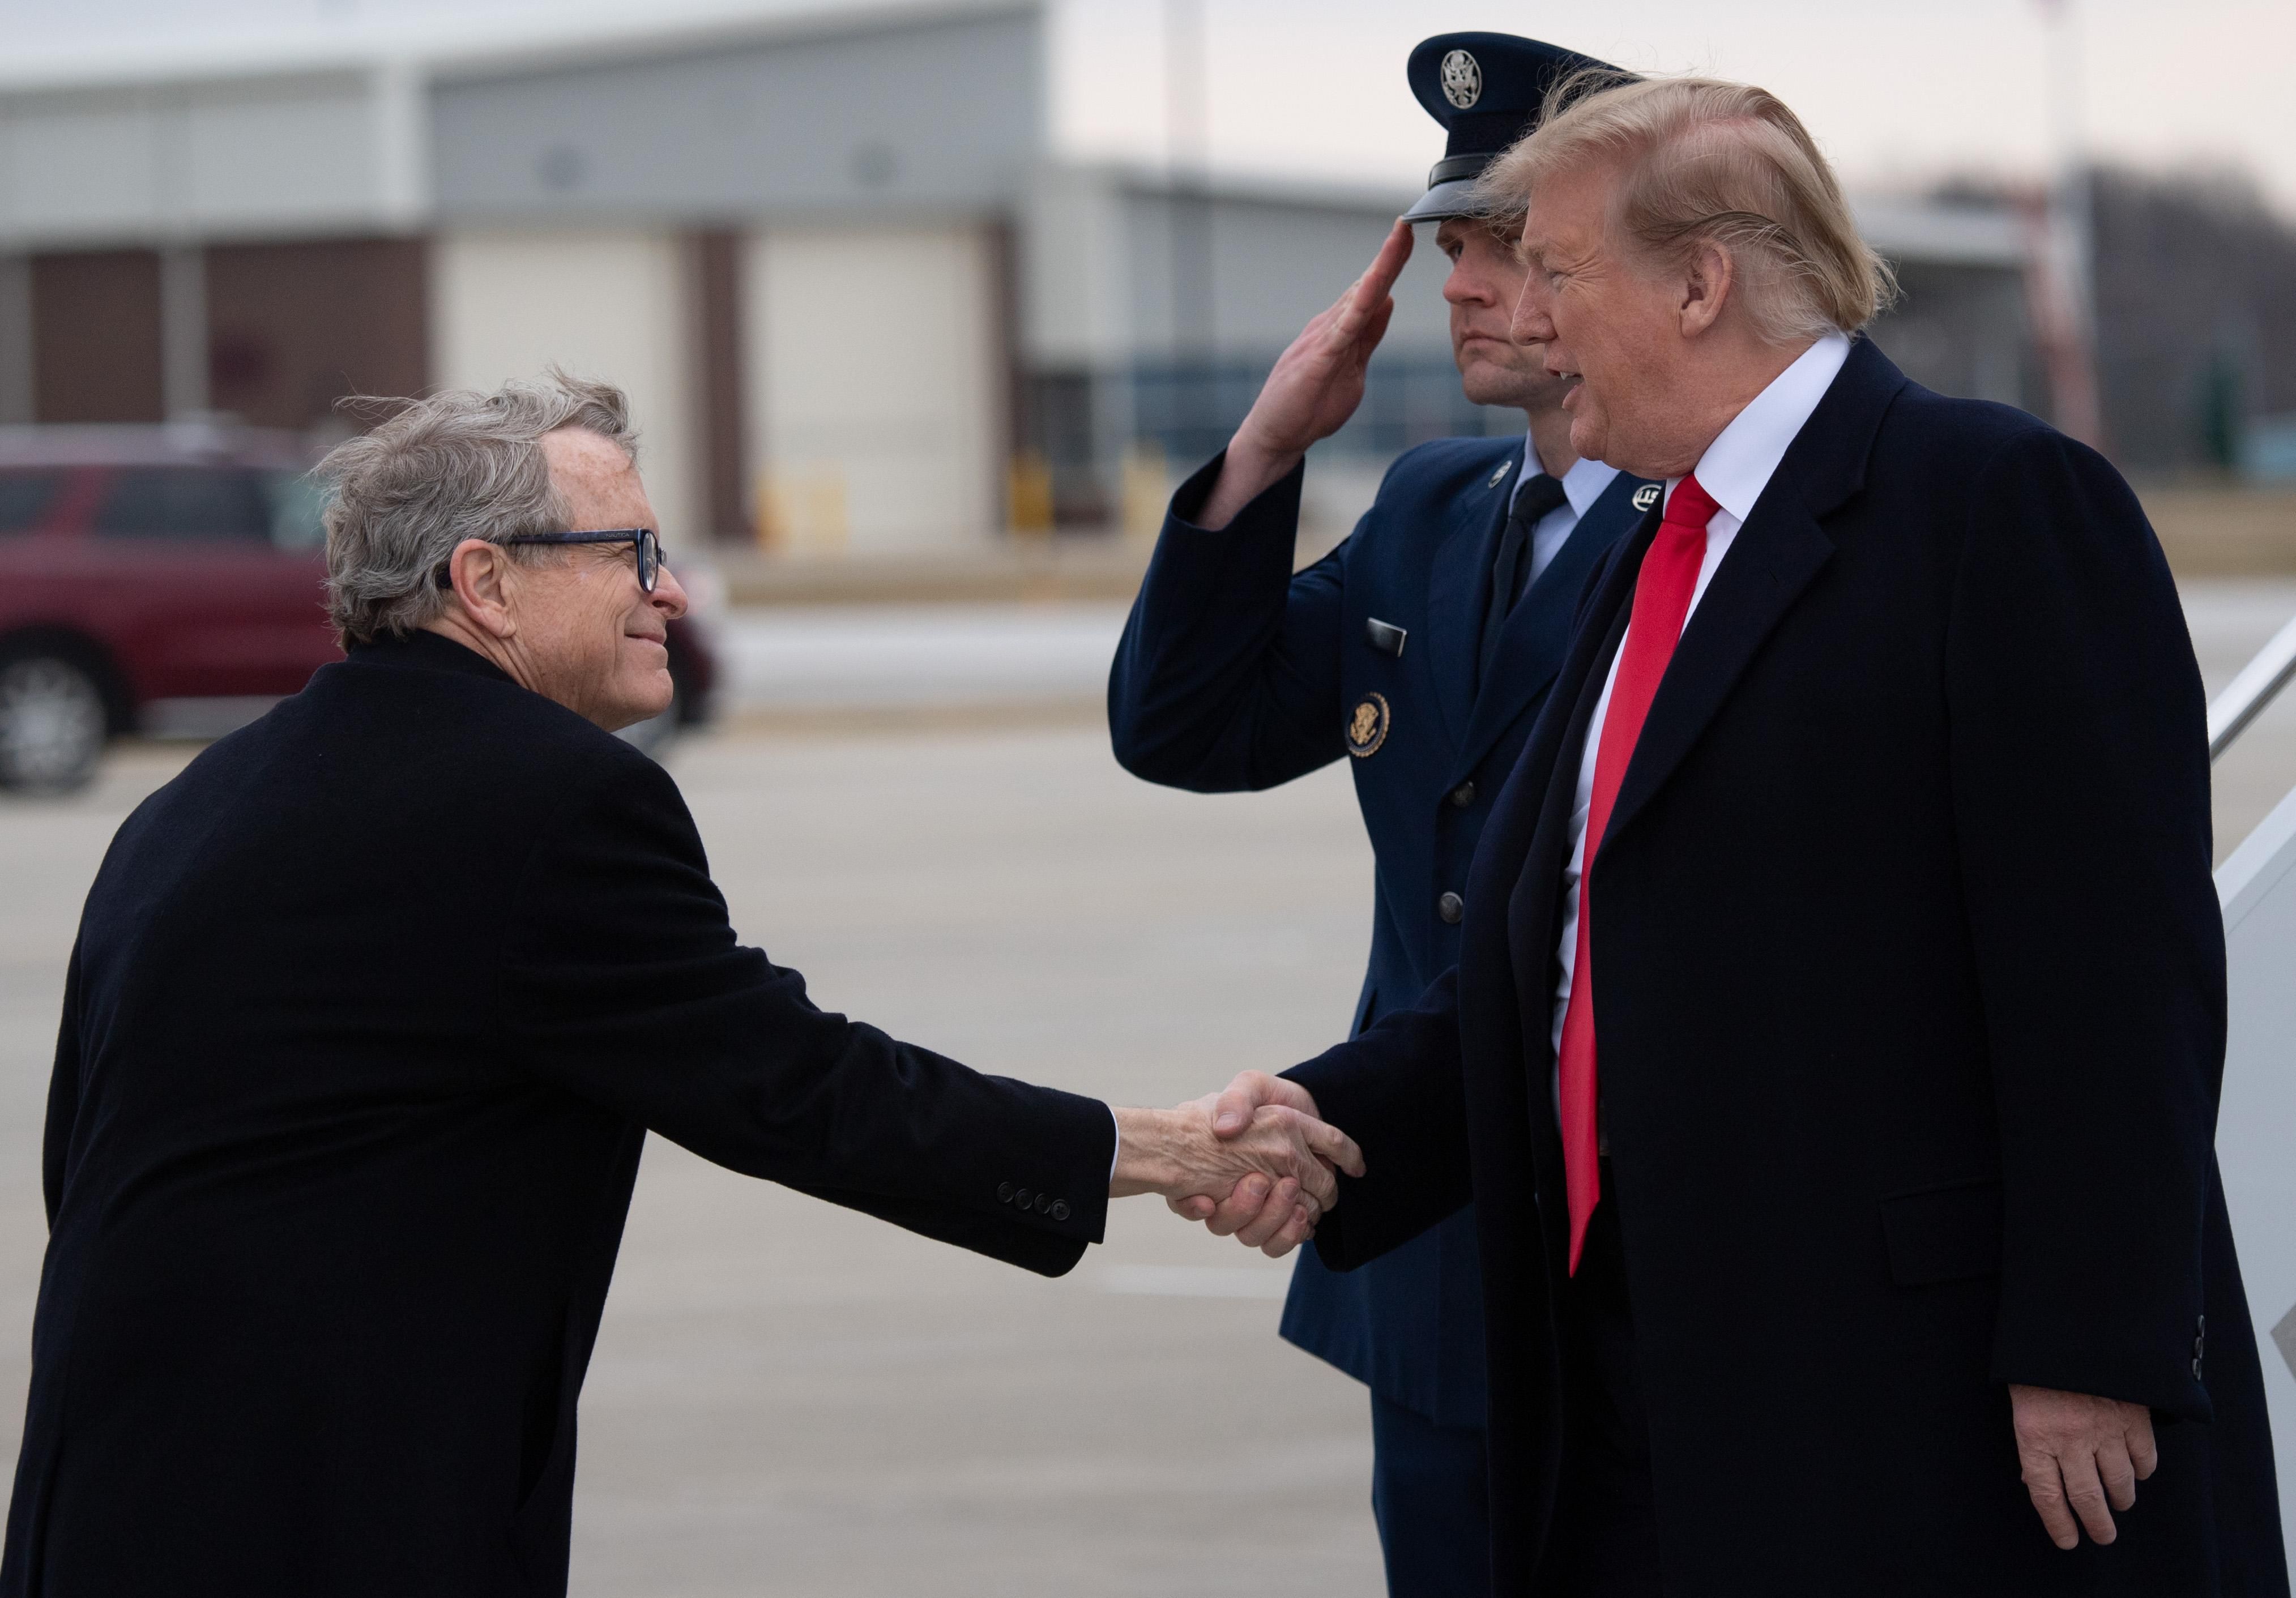 Then-U.S. President Donald Trump shakes hands with Ohio's Republican Gov. Mike DeWine as he disembarks from Air Force One at the Akron-Canton Airport in Canton, Ohio on March 20, 2019.